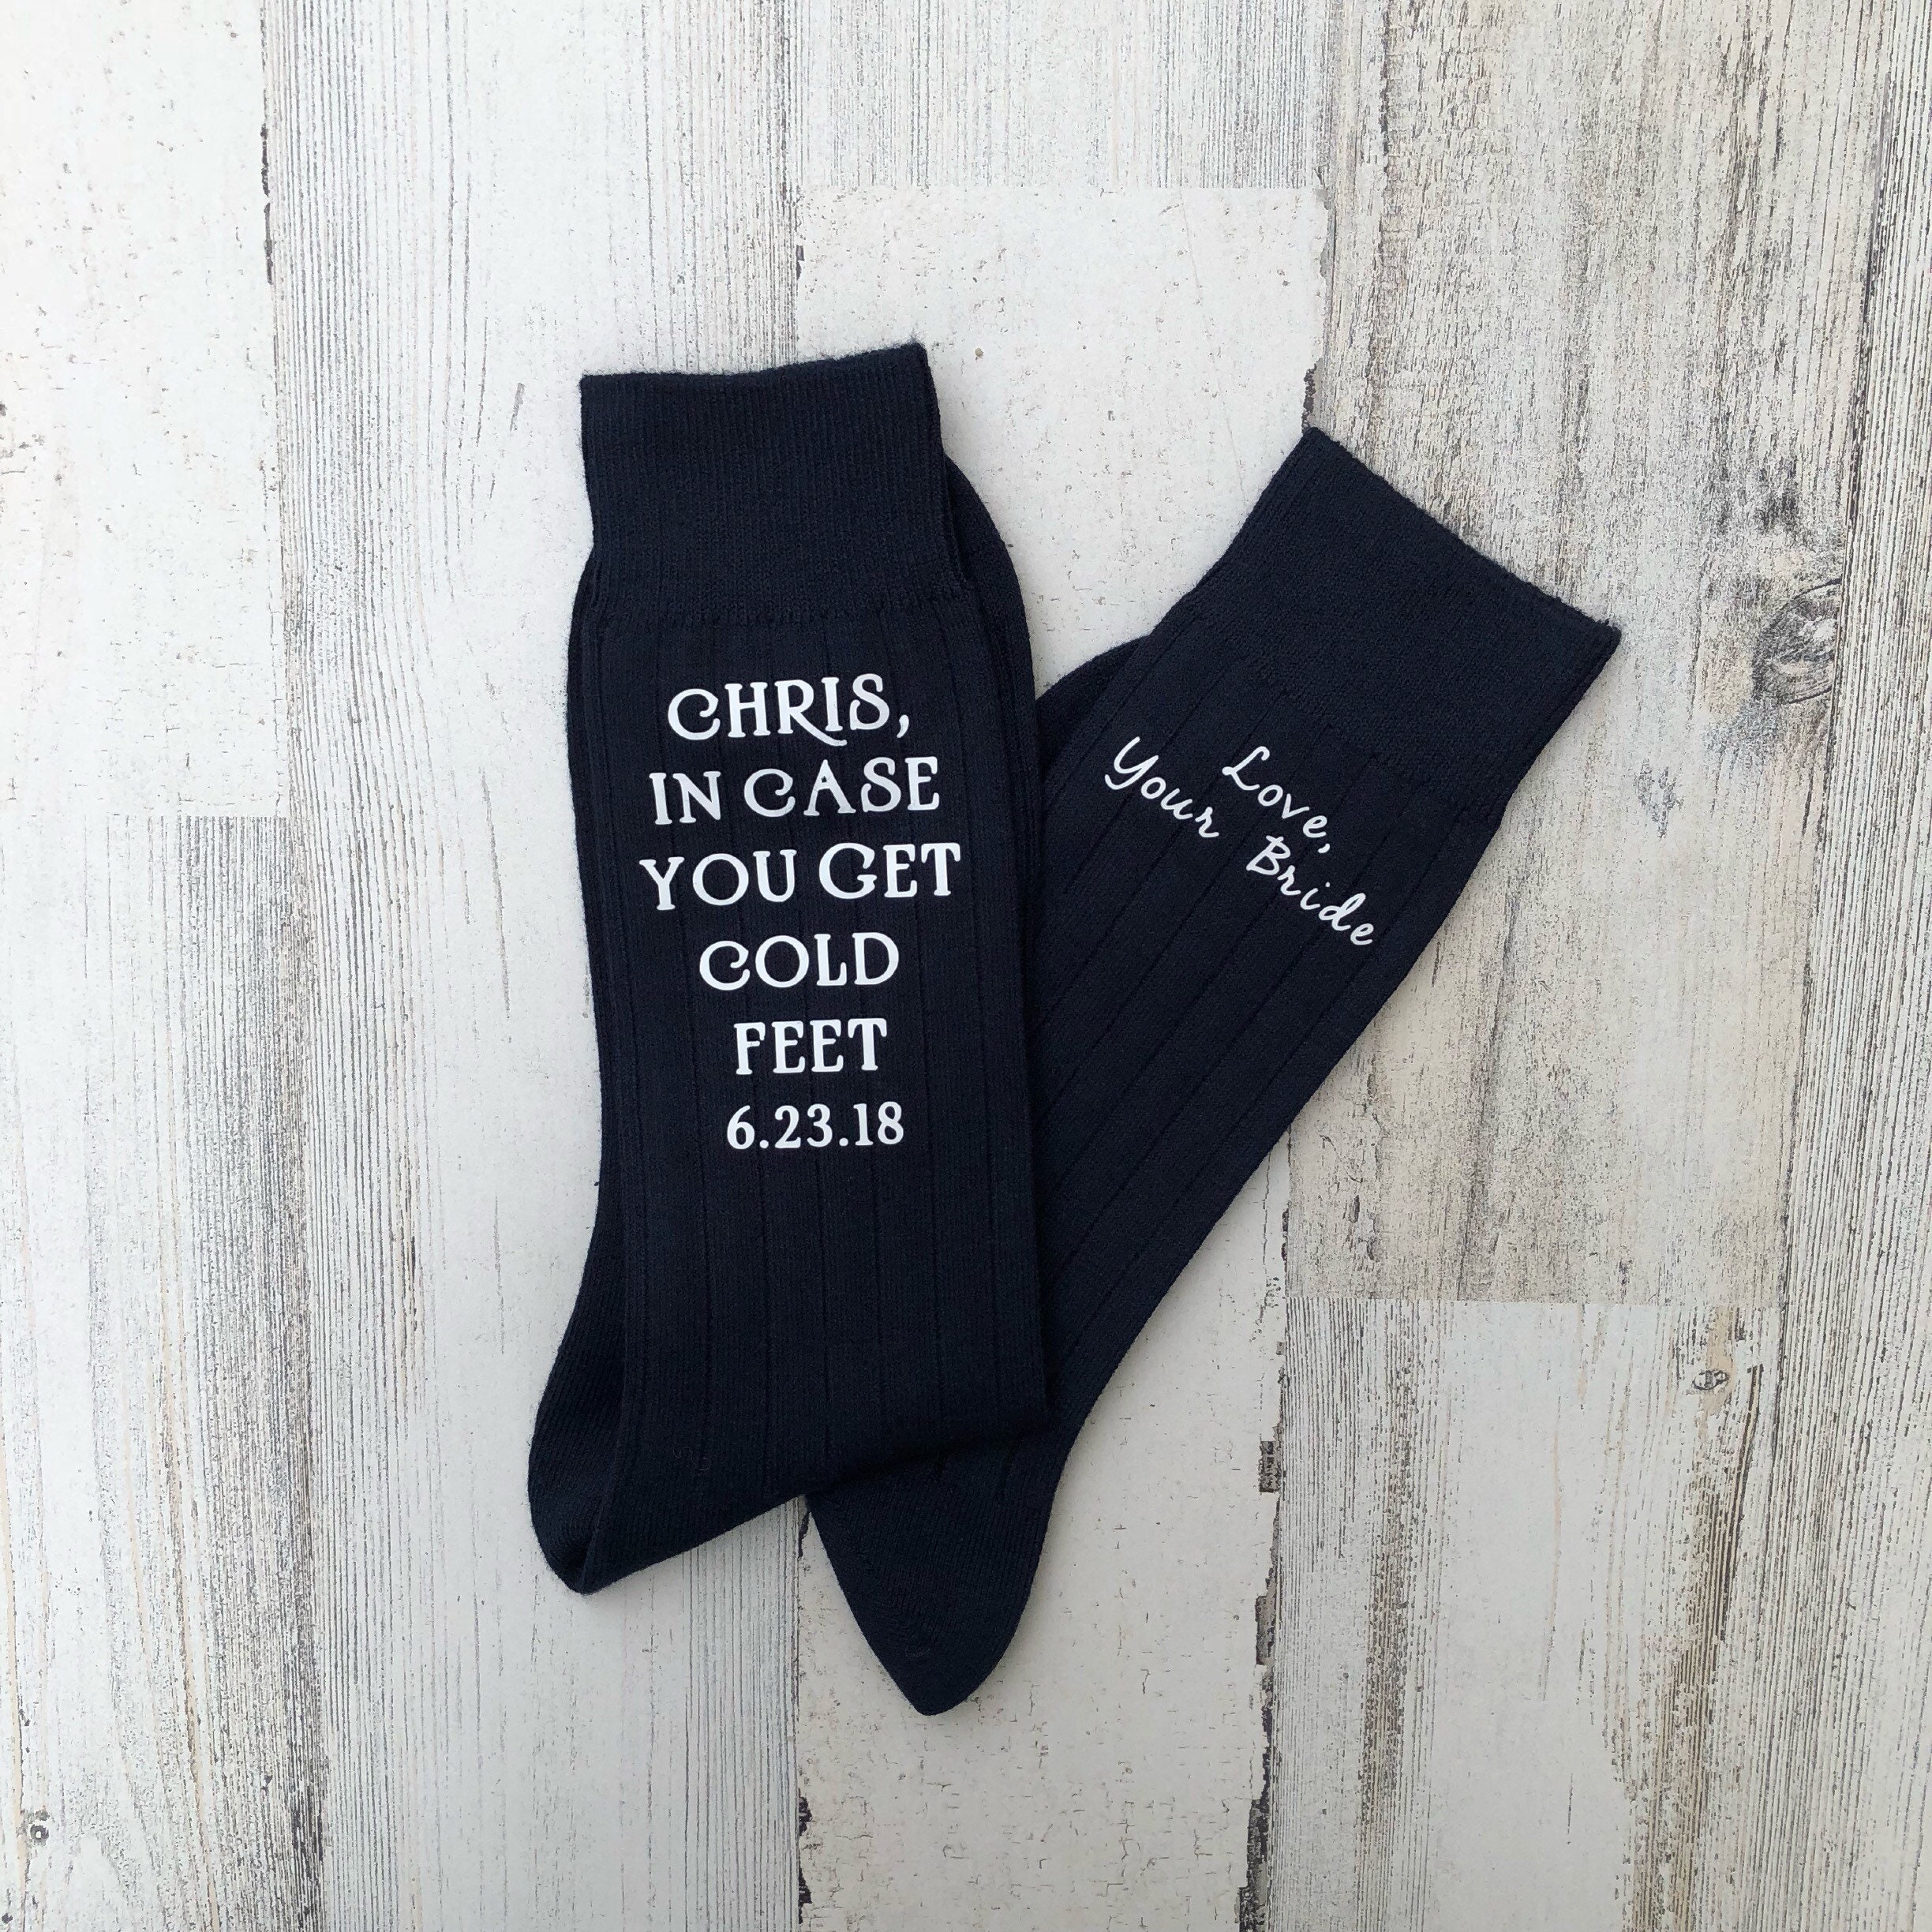 Sole Mates - Babe, In Case You Get Cold Feet Customizable Socks for the ...